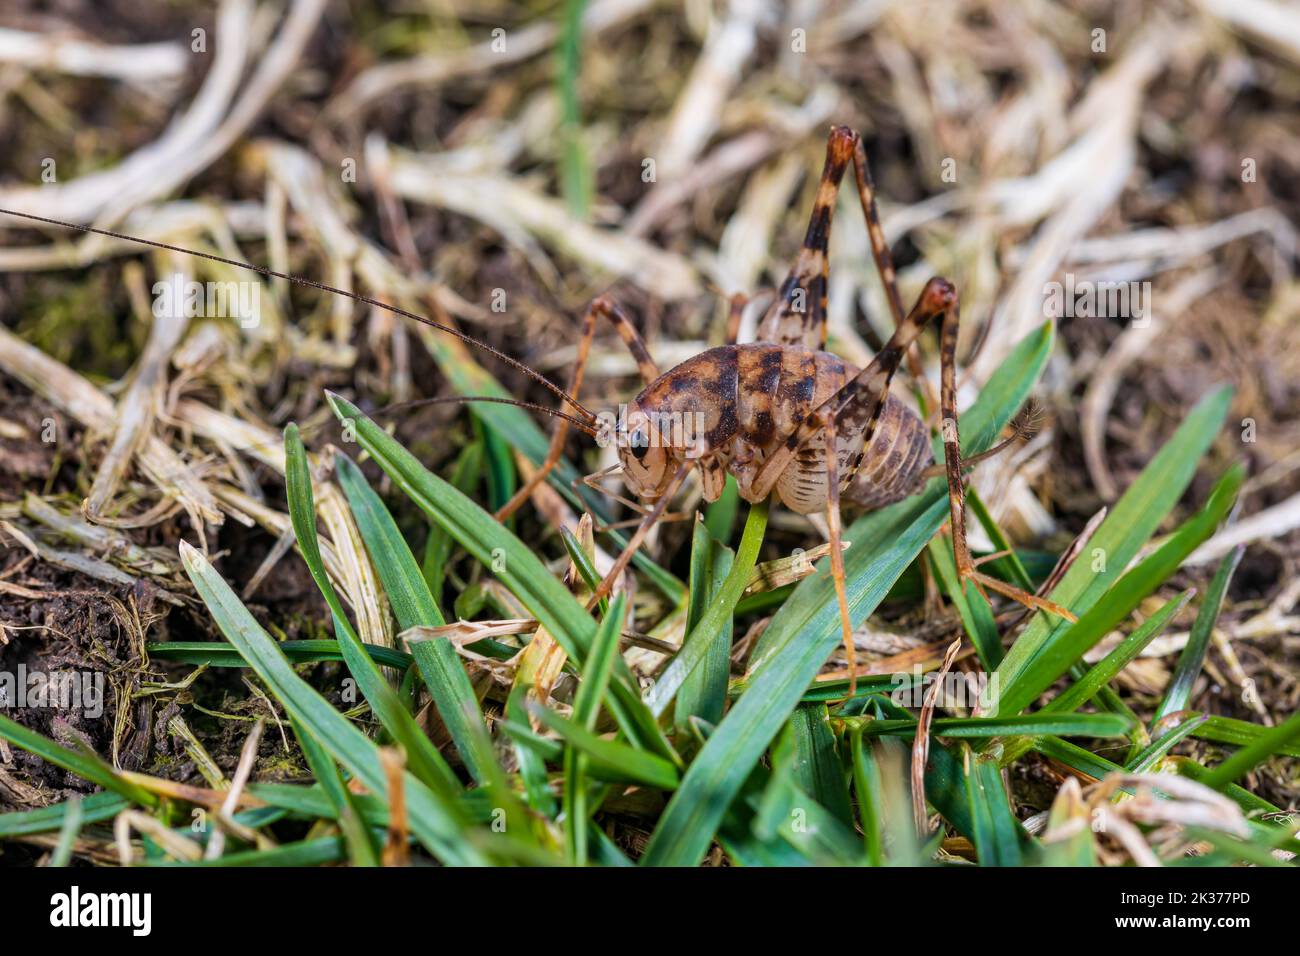 Closeup of Camel Cricket in grass. pest control, insect and nature conservation concept. Stock Photo